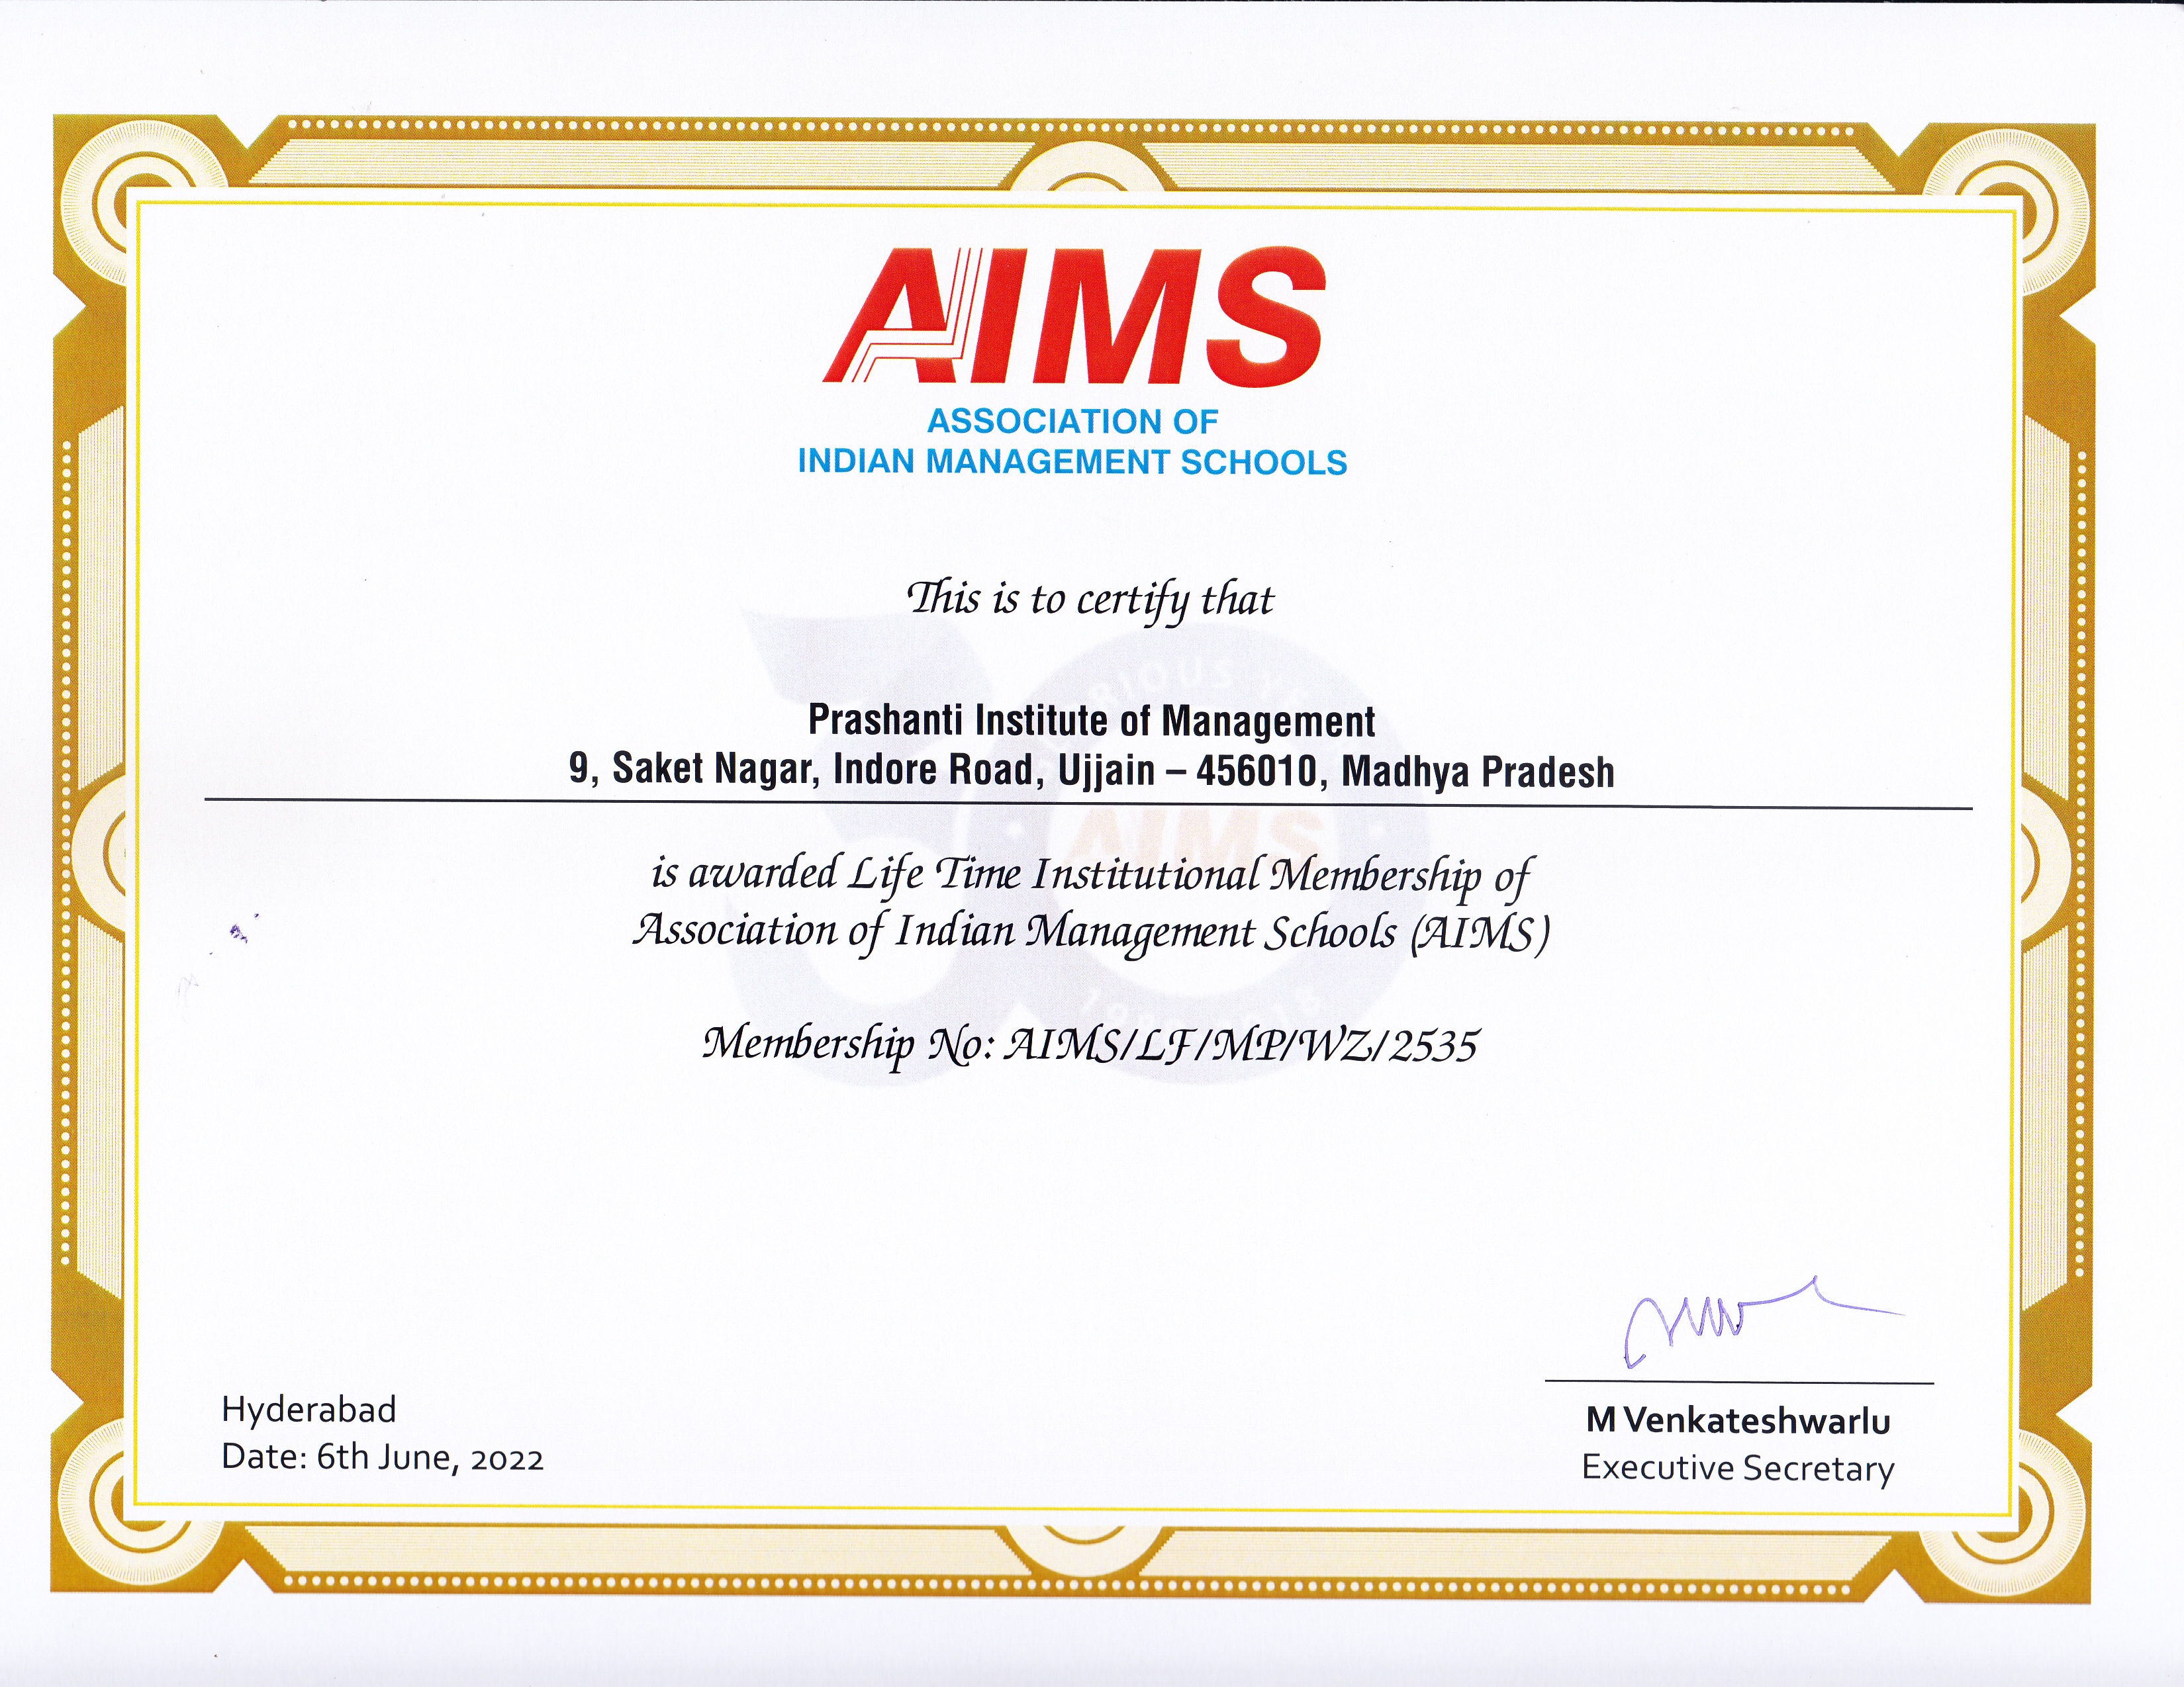 PIM recognized by AIMS - A National Body of B-Schools of India